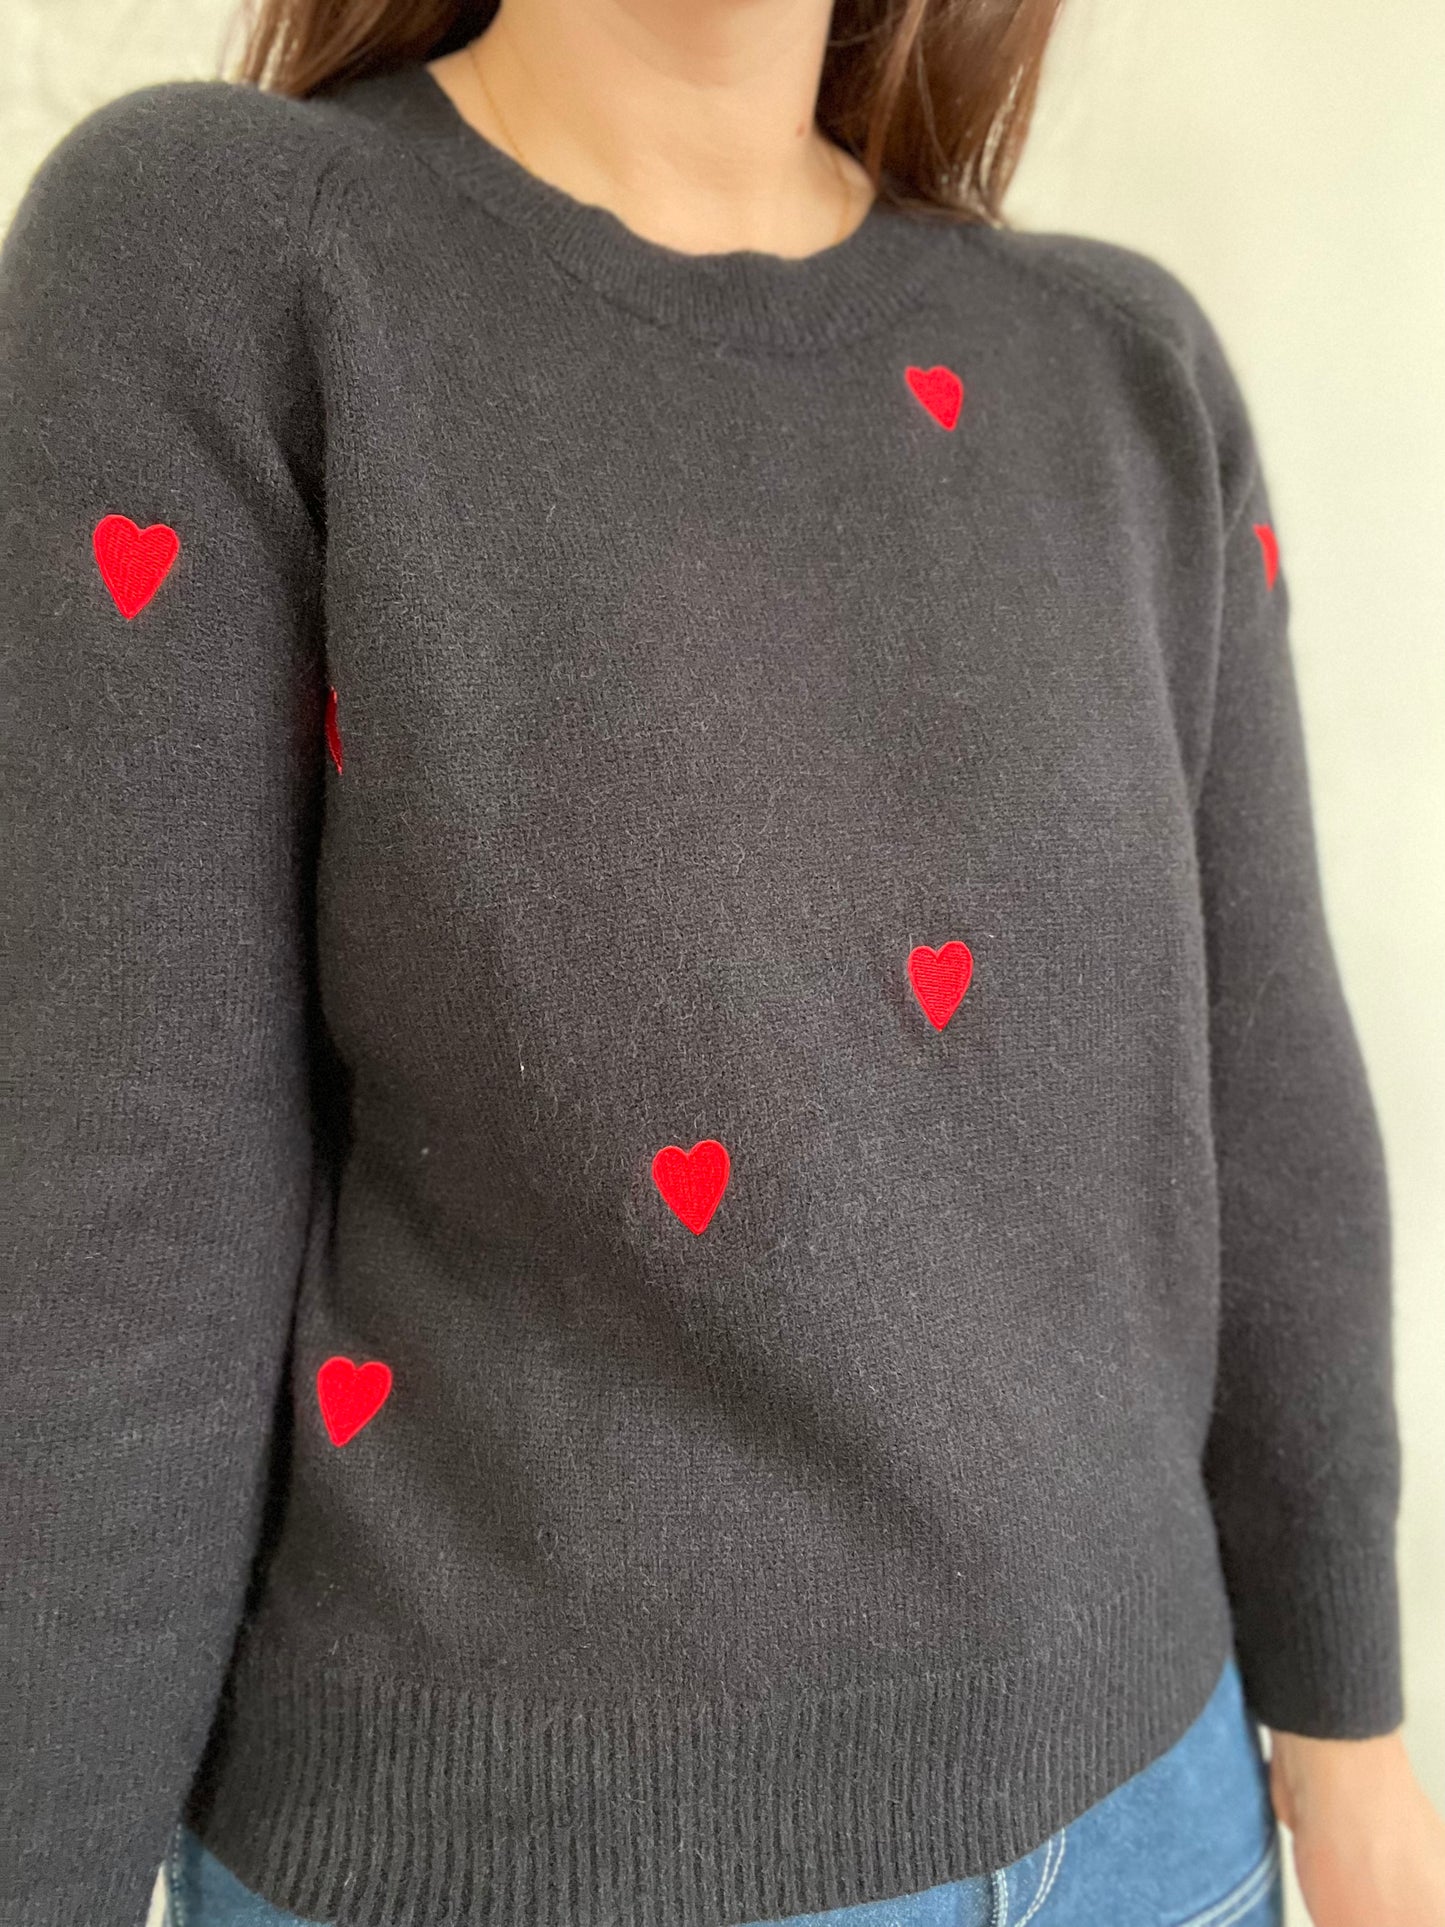 Black and Red Hearts Sweater - M